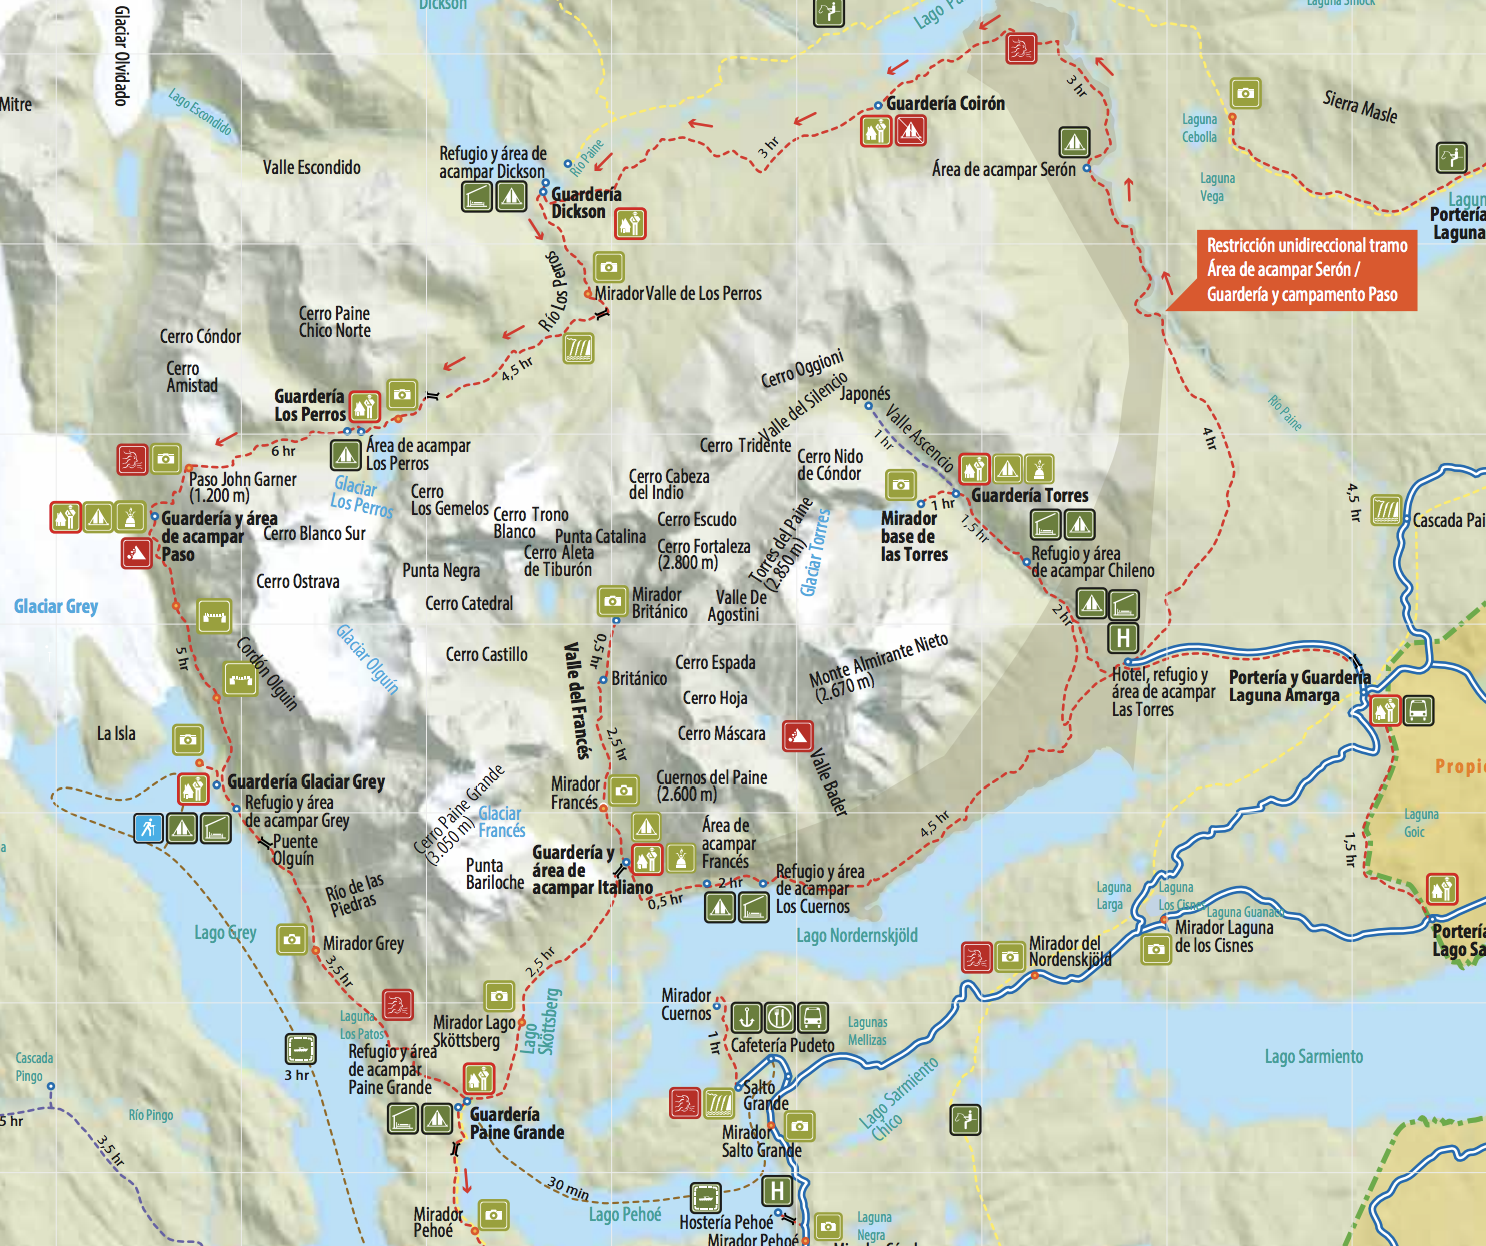 Map of torres del paine national park - image from torresdelpaine.com